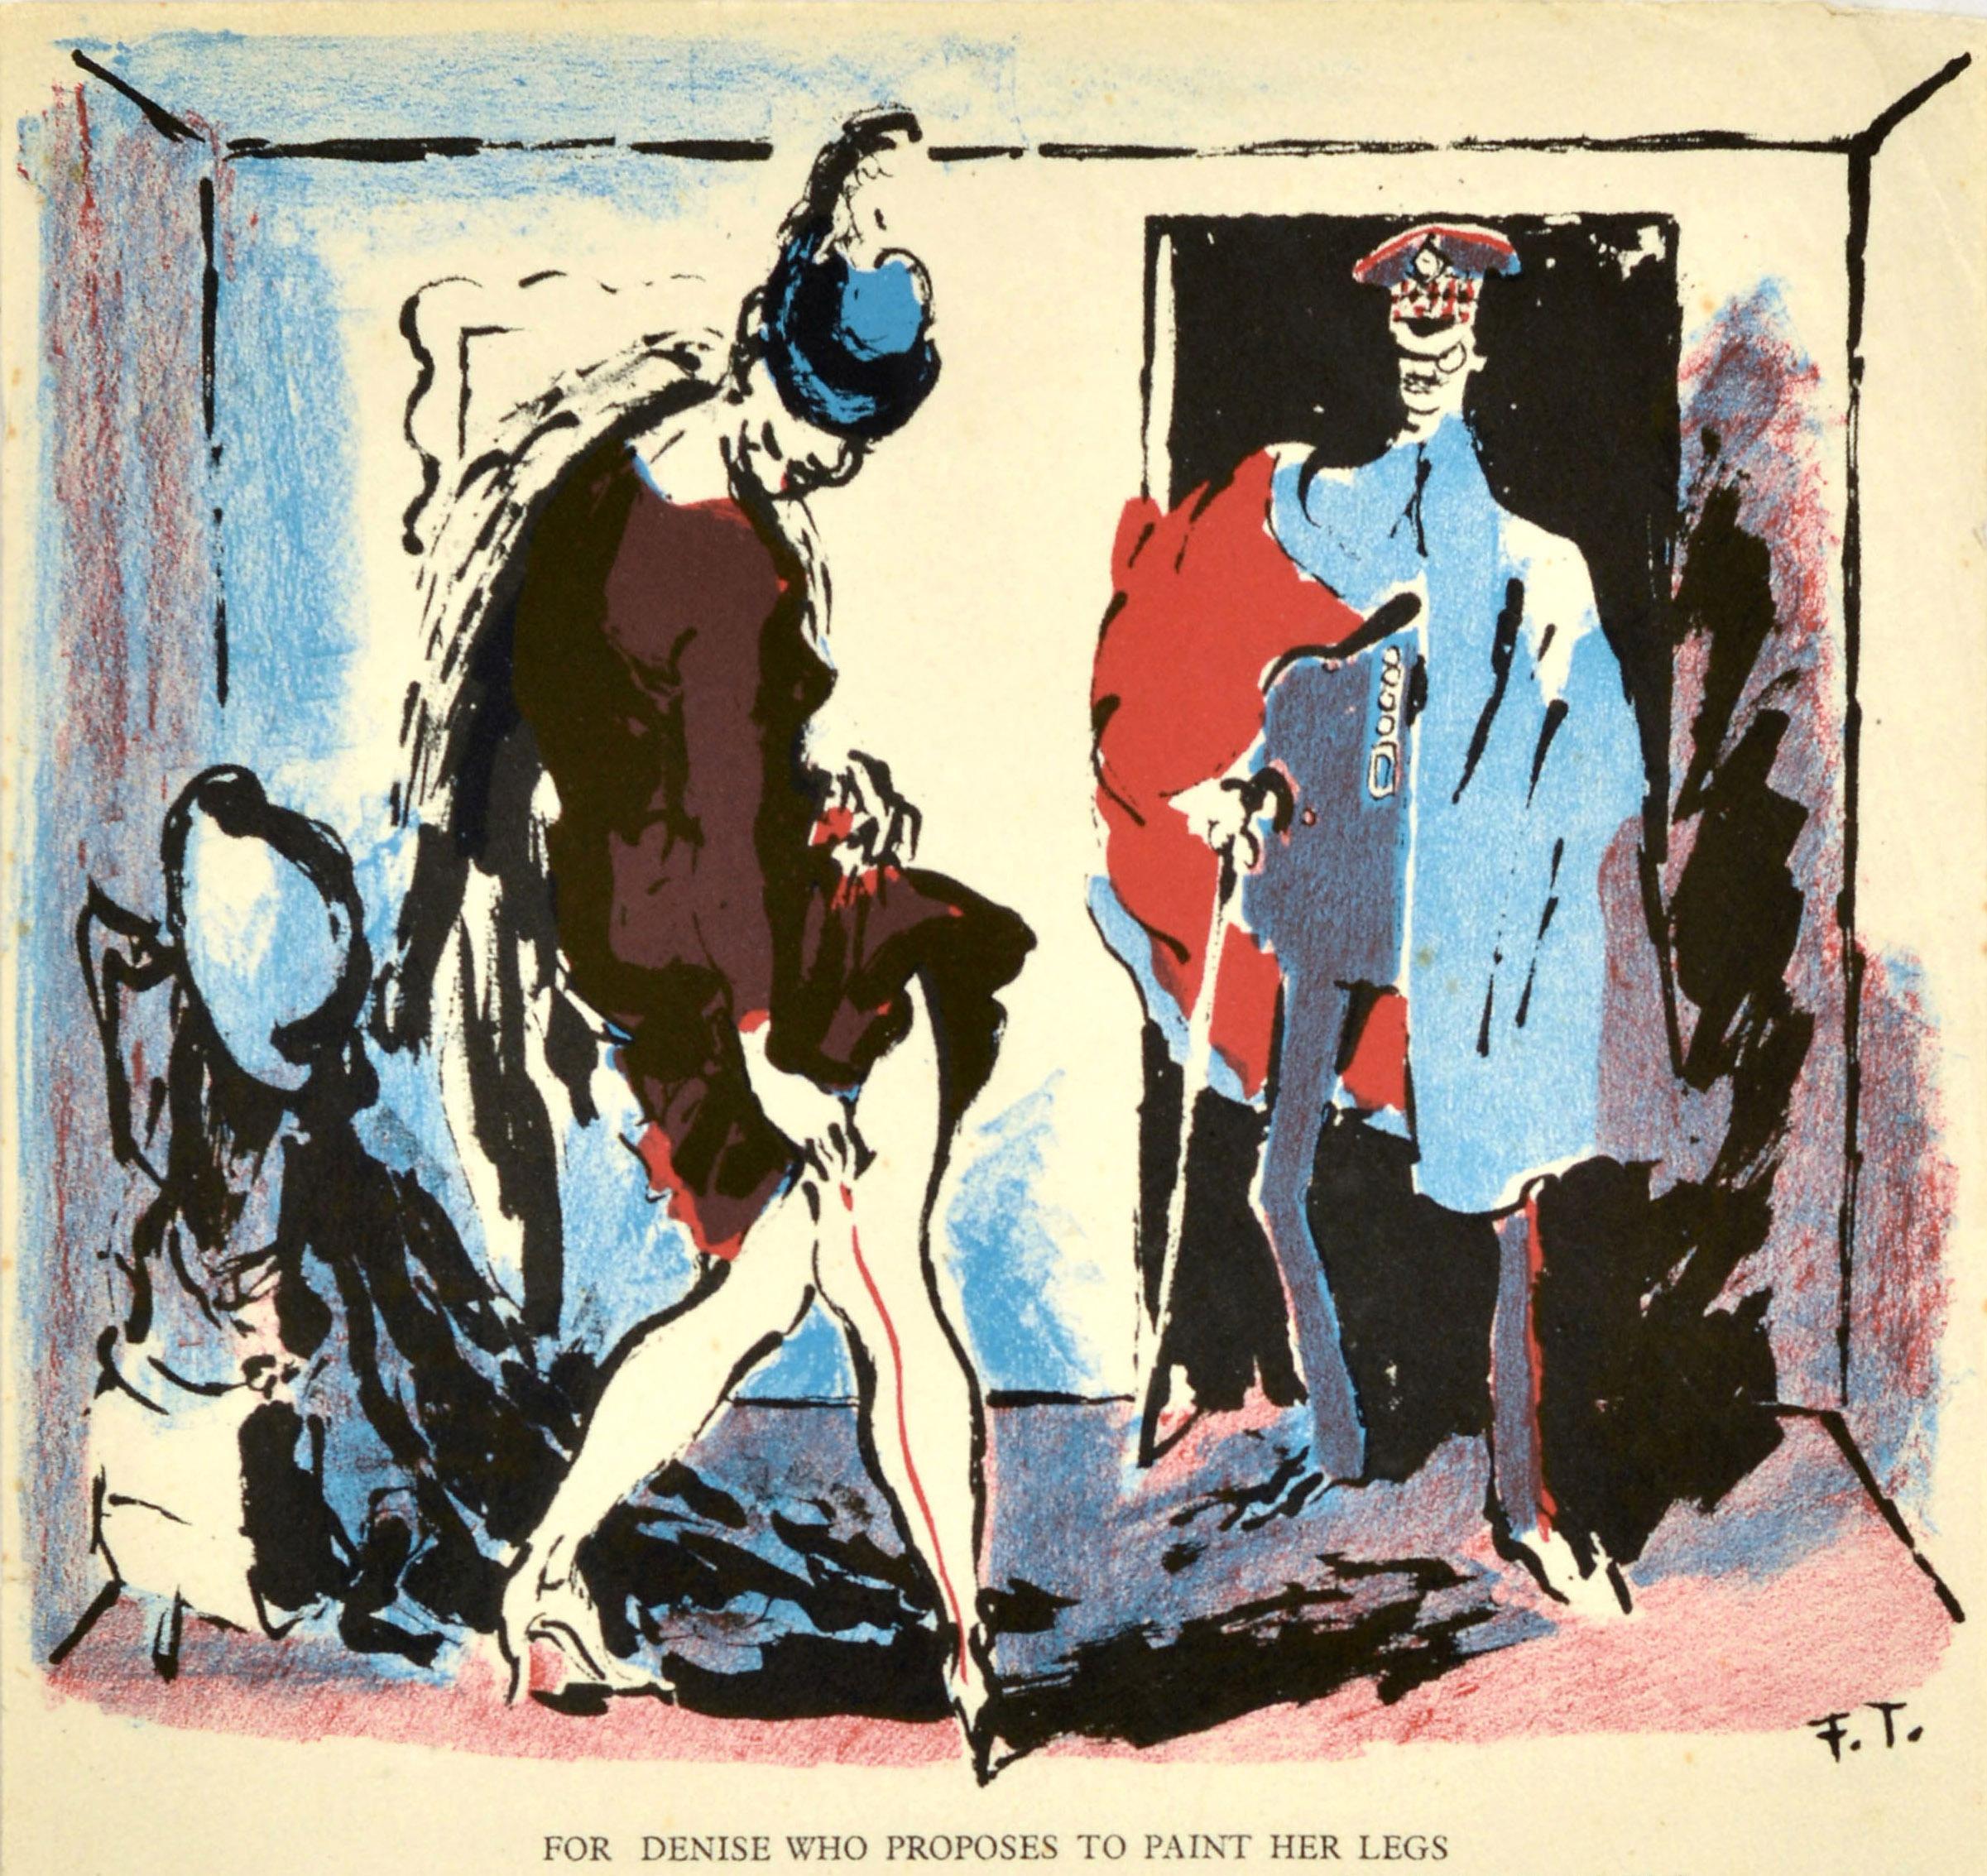 Original vintage World War Two poster featuring an illustration by the Polish painter and official war artist Feliks Topolski (1907-1989) of a lady dressed up to go out, drawing a seam line up the back of her leg due to the wartime nylon rationing